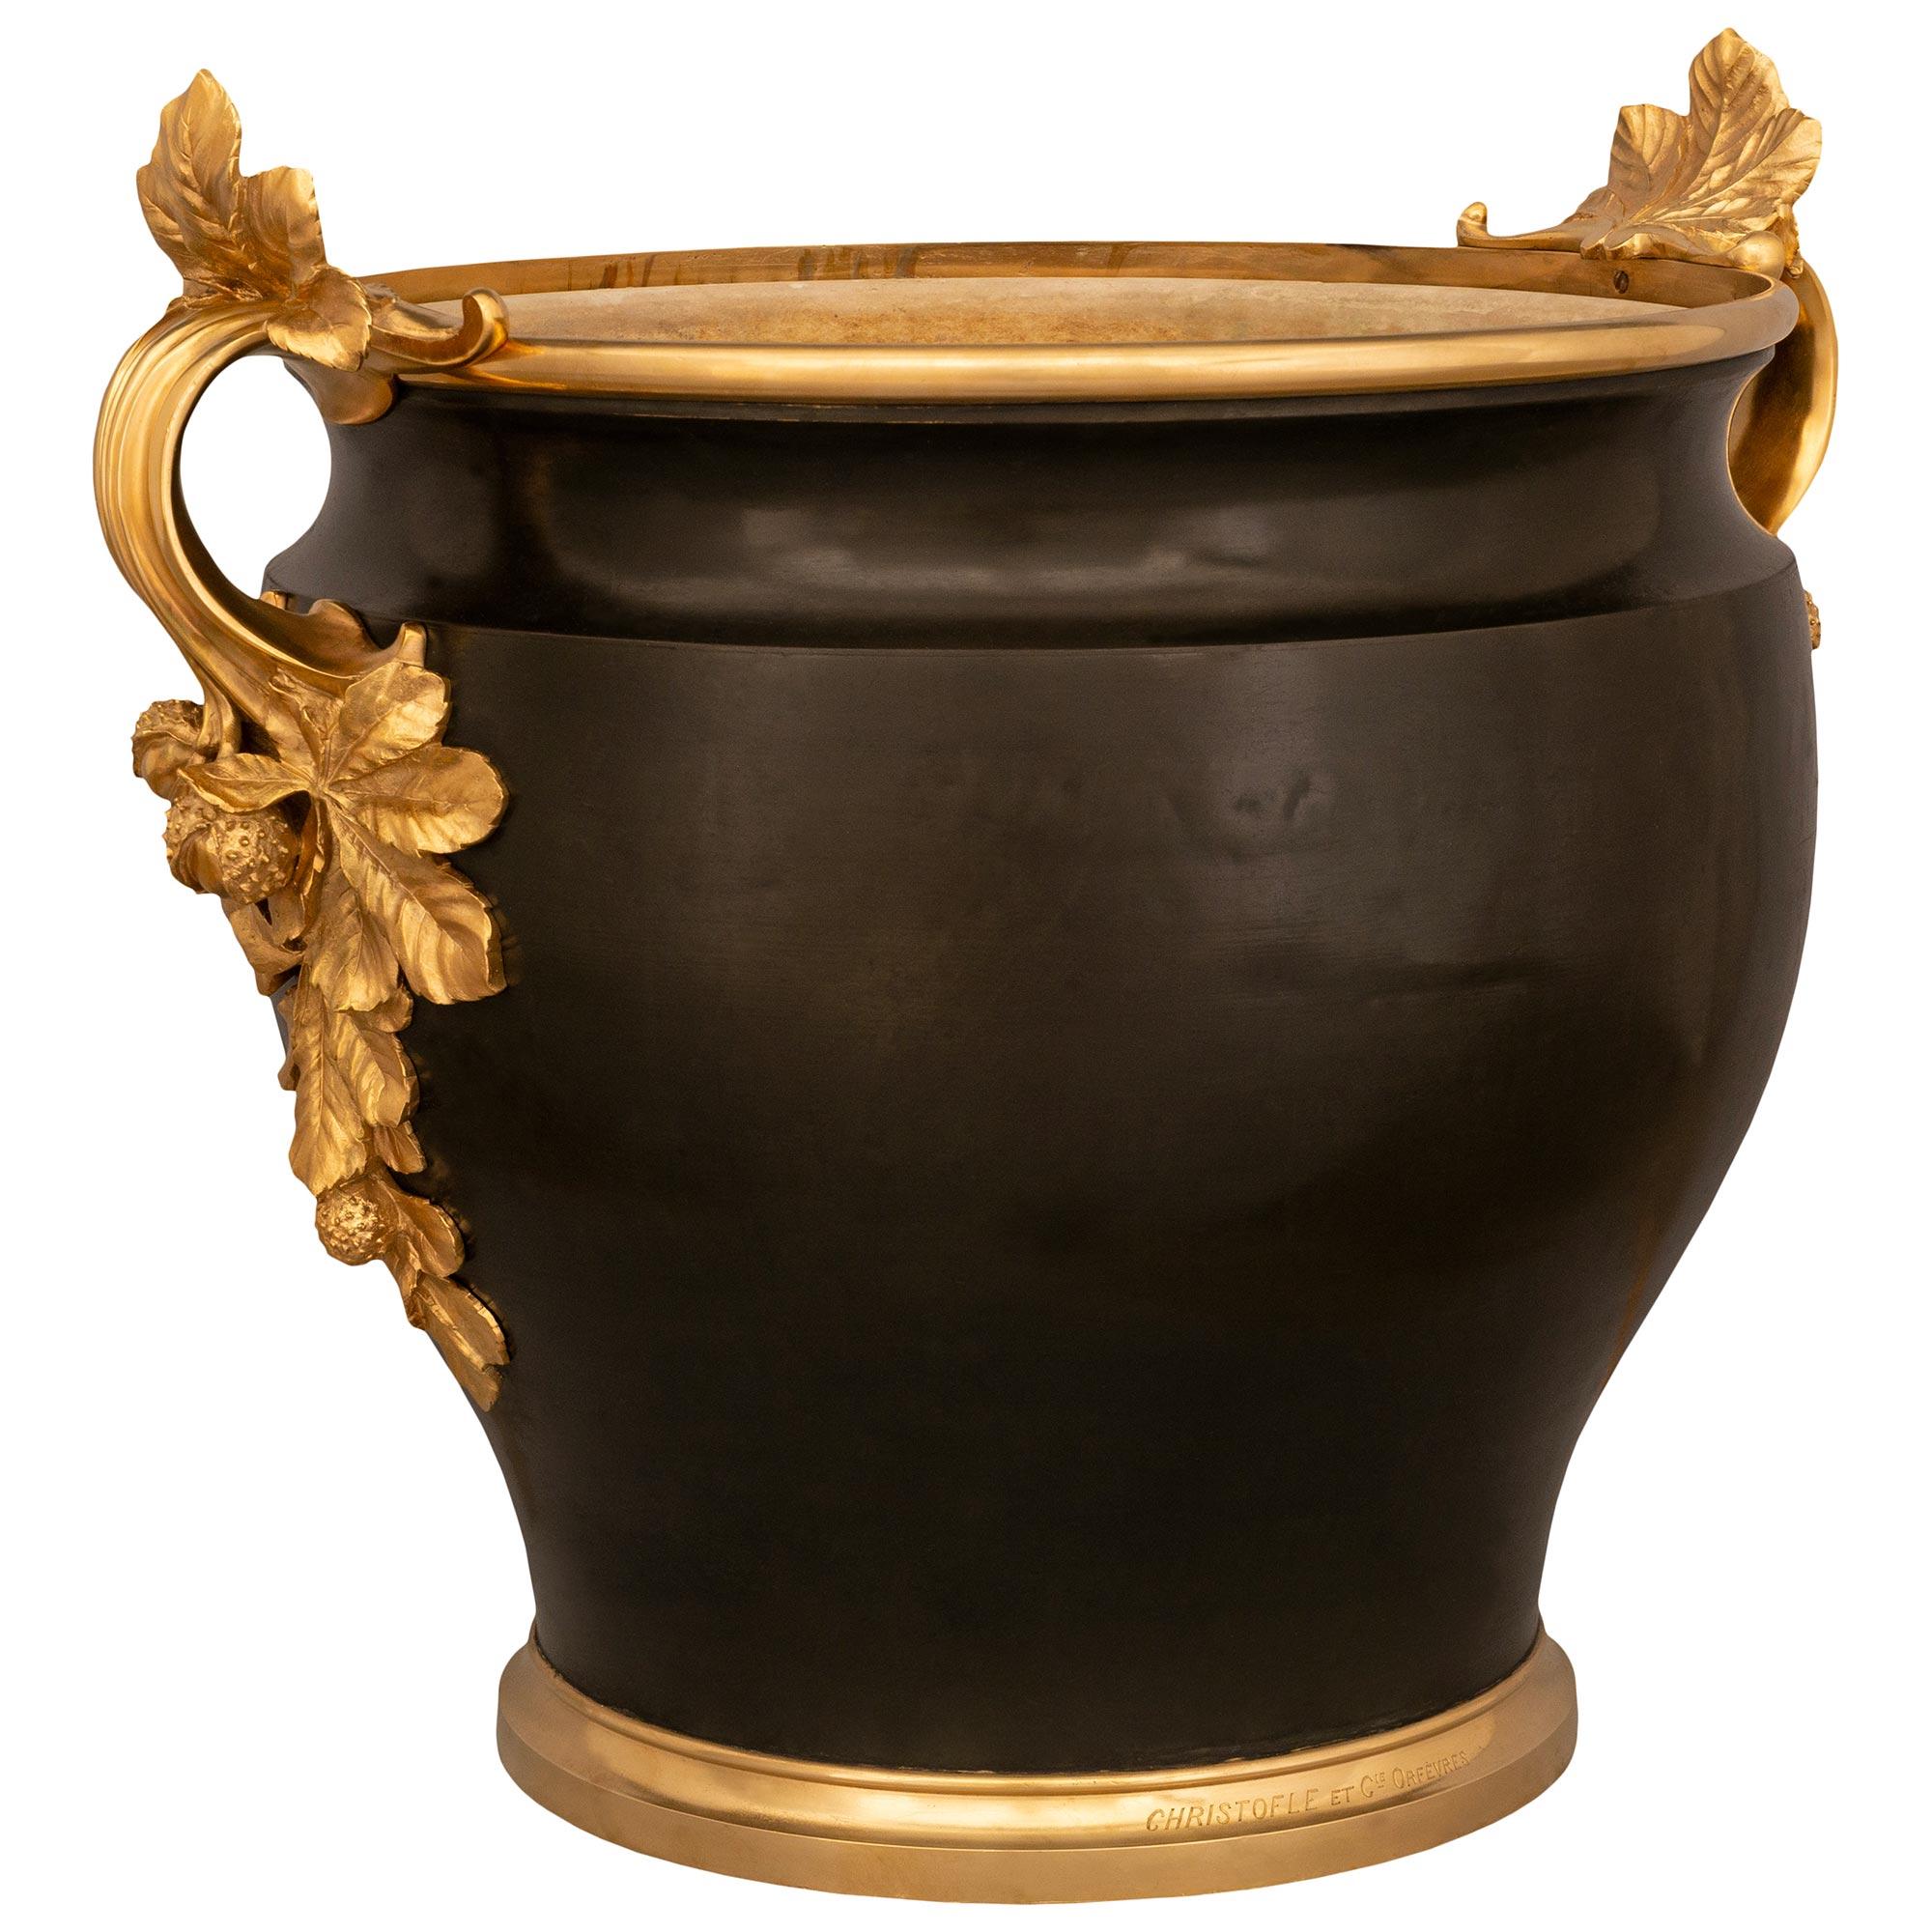 A most impressive and large scaled French 19th century Louis XVI st. Ormolu and patinated Bronze Jardinière vase signed Christofle et Cie Orfevres. This unique jardiniere is positioned atop a circular Ormolu base with a fine mottled edge and